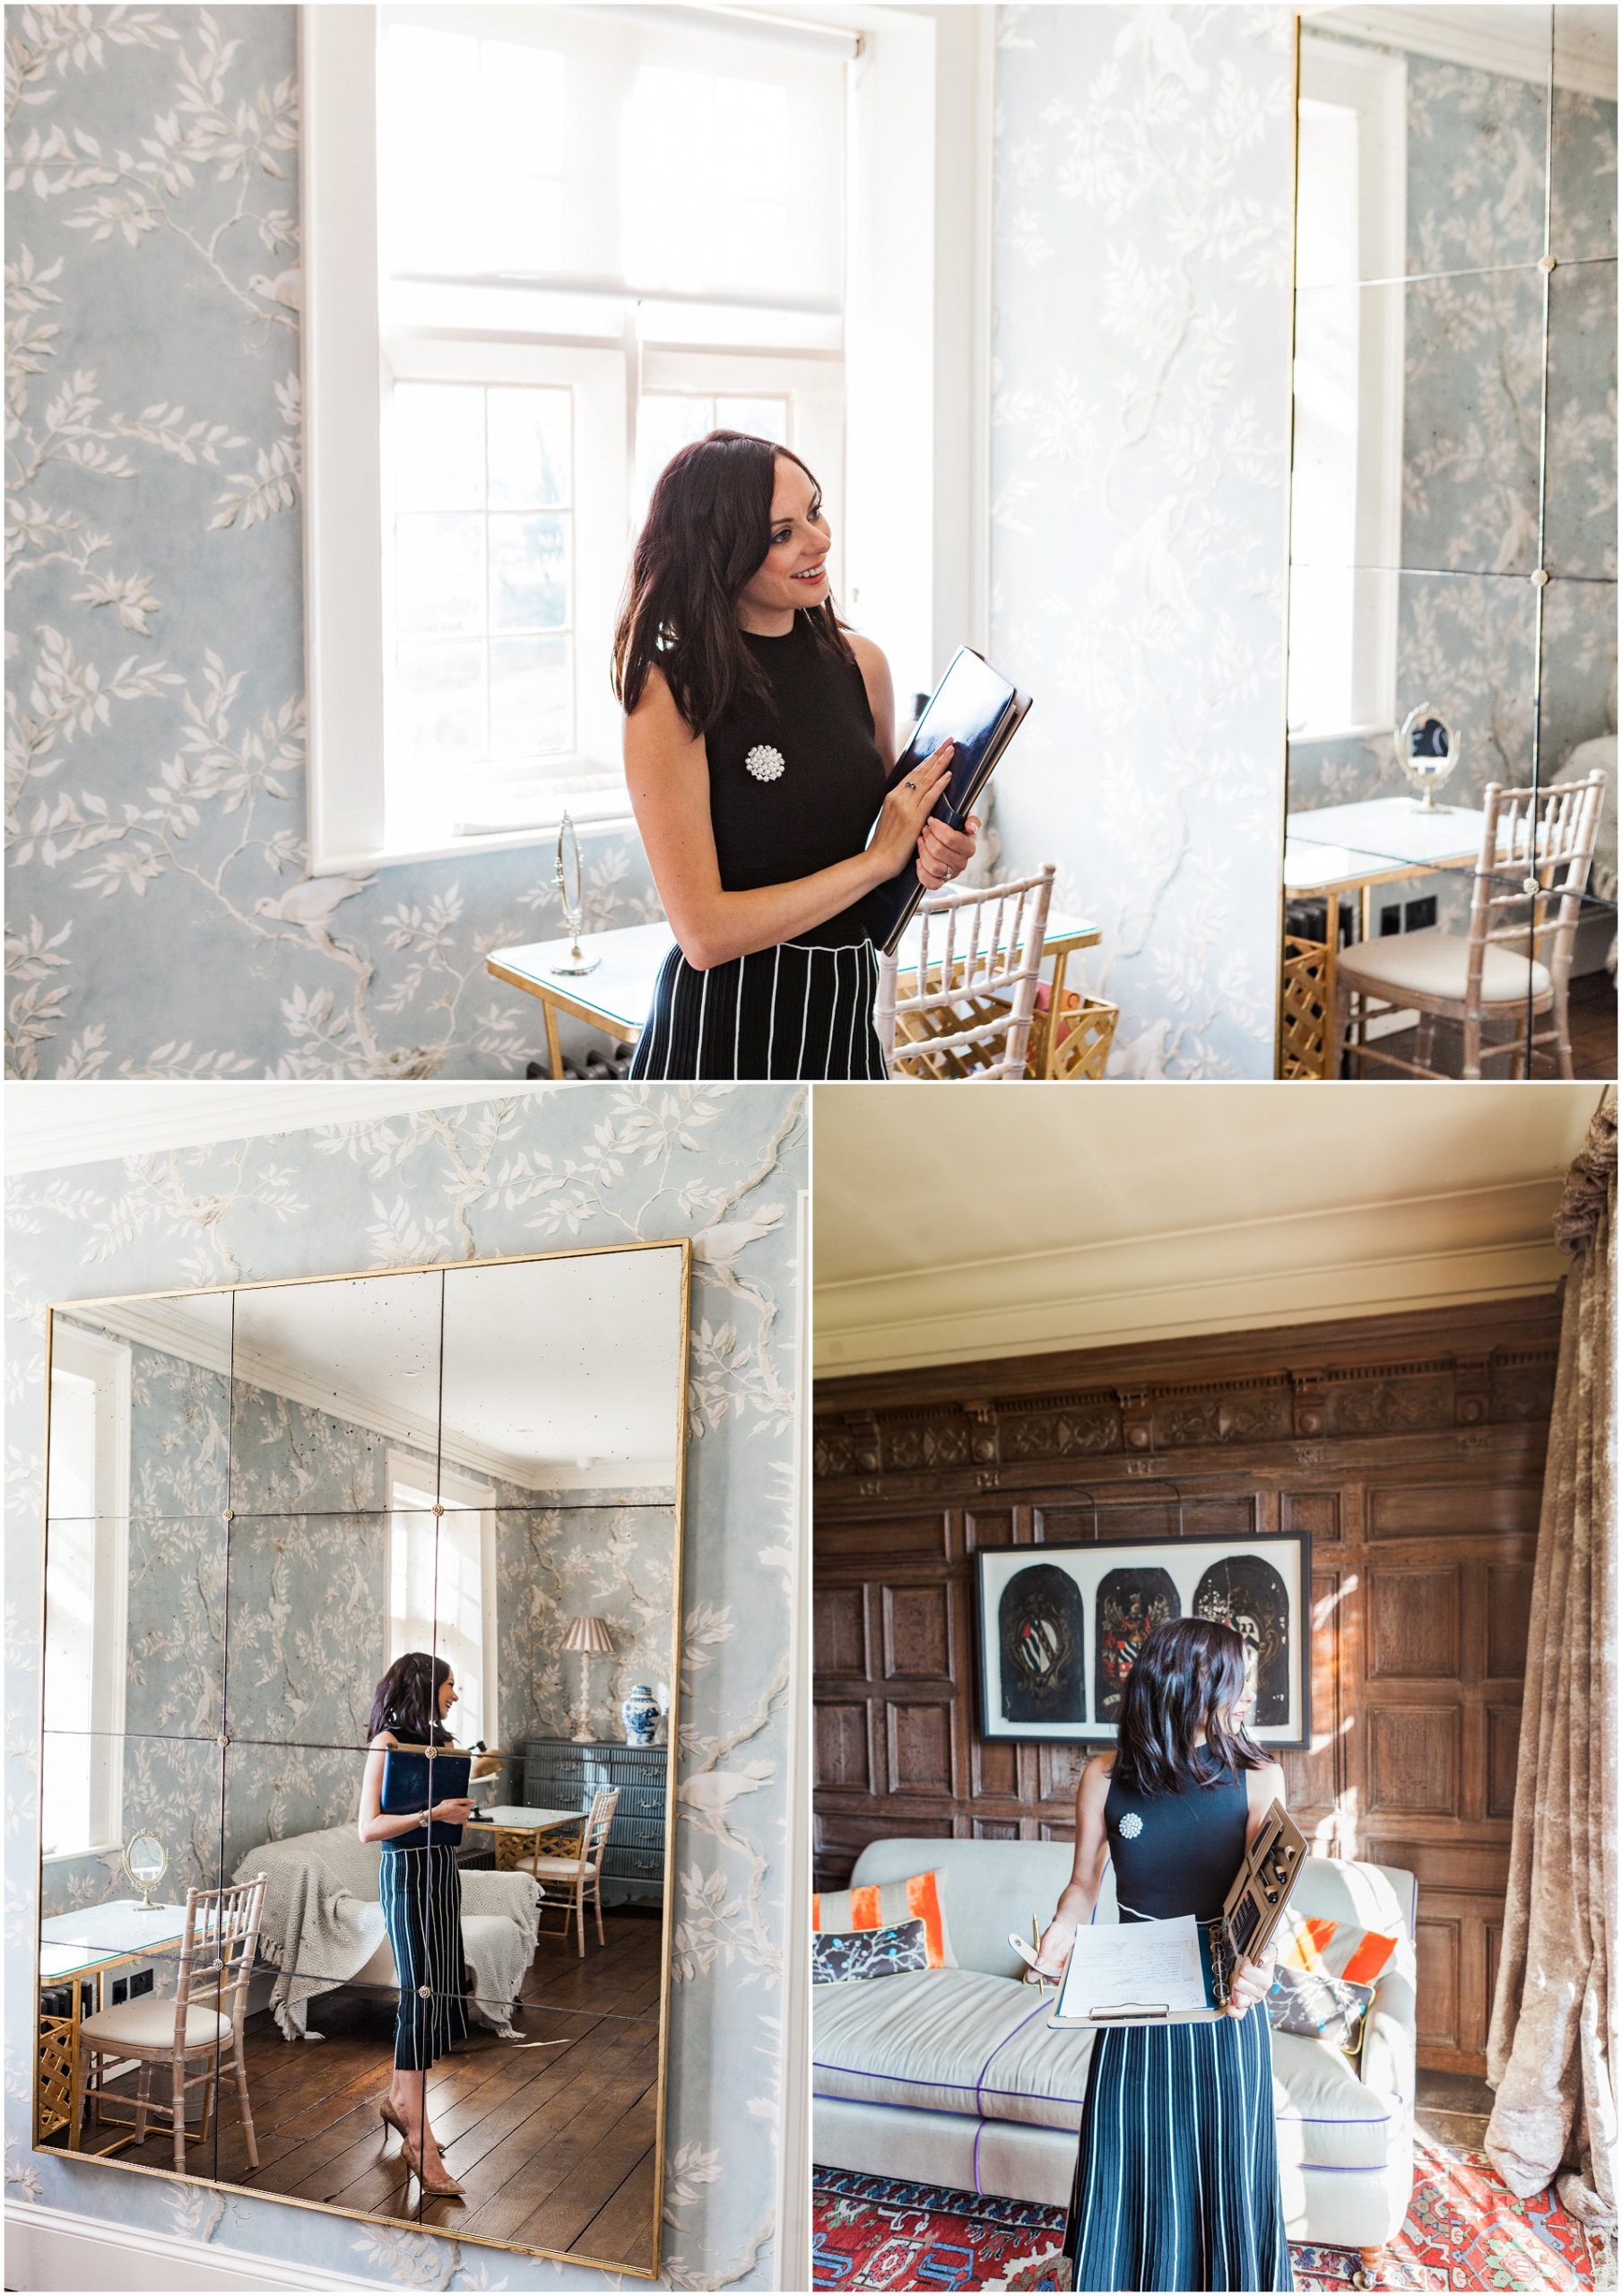 Cheshire wedding planner brand shoot with Abigail Lucy.  Images by London brand photographer AKP Branding Stories